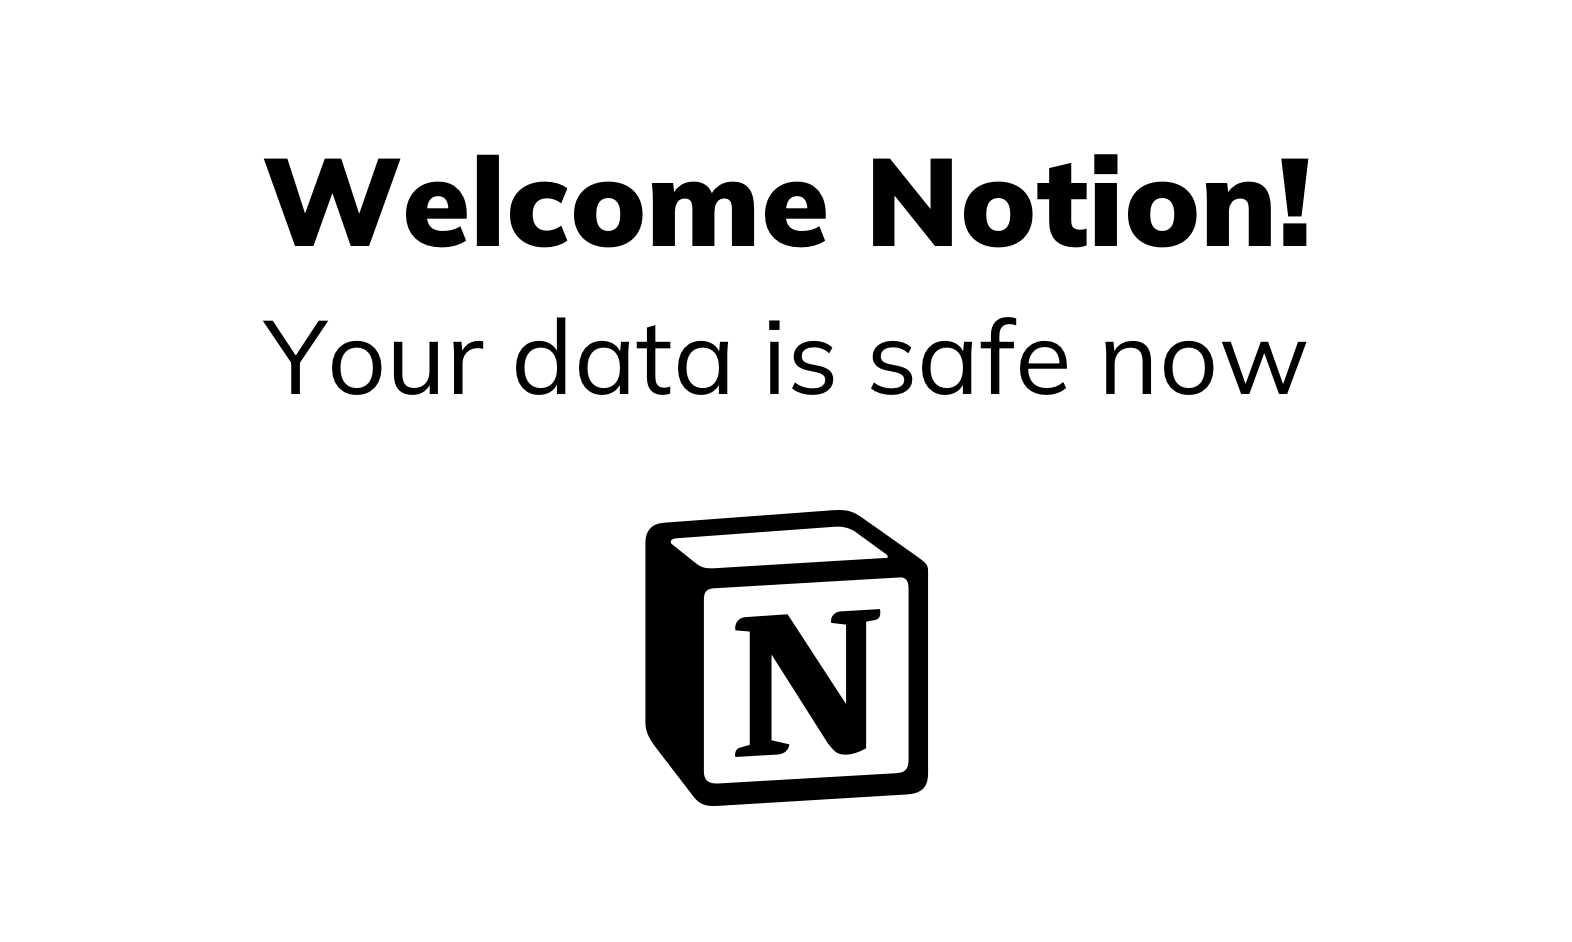 Welcome Notion backups! Your data is safe now.